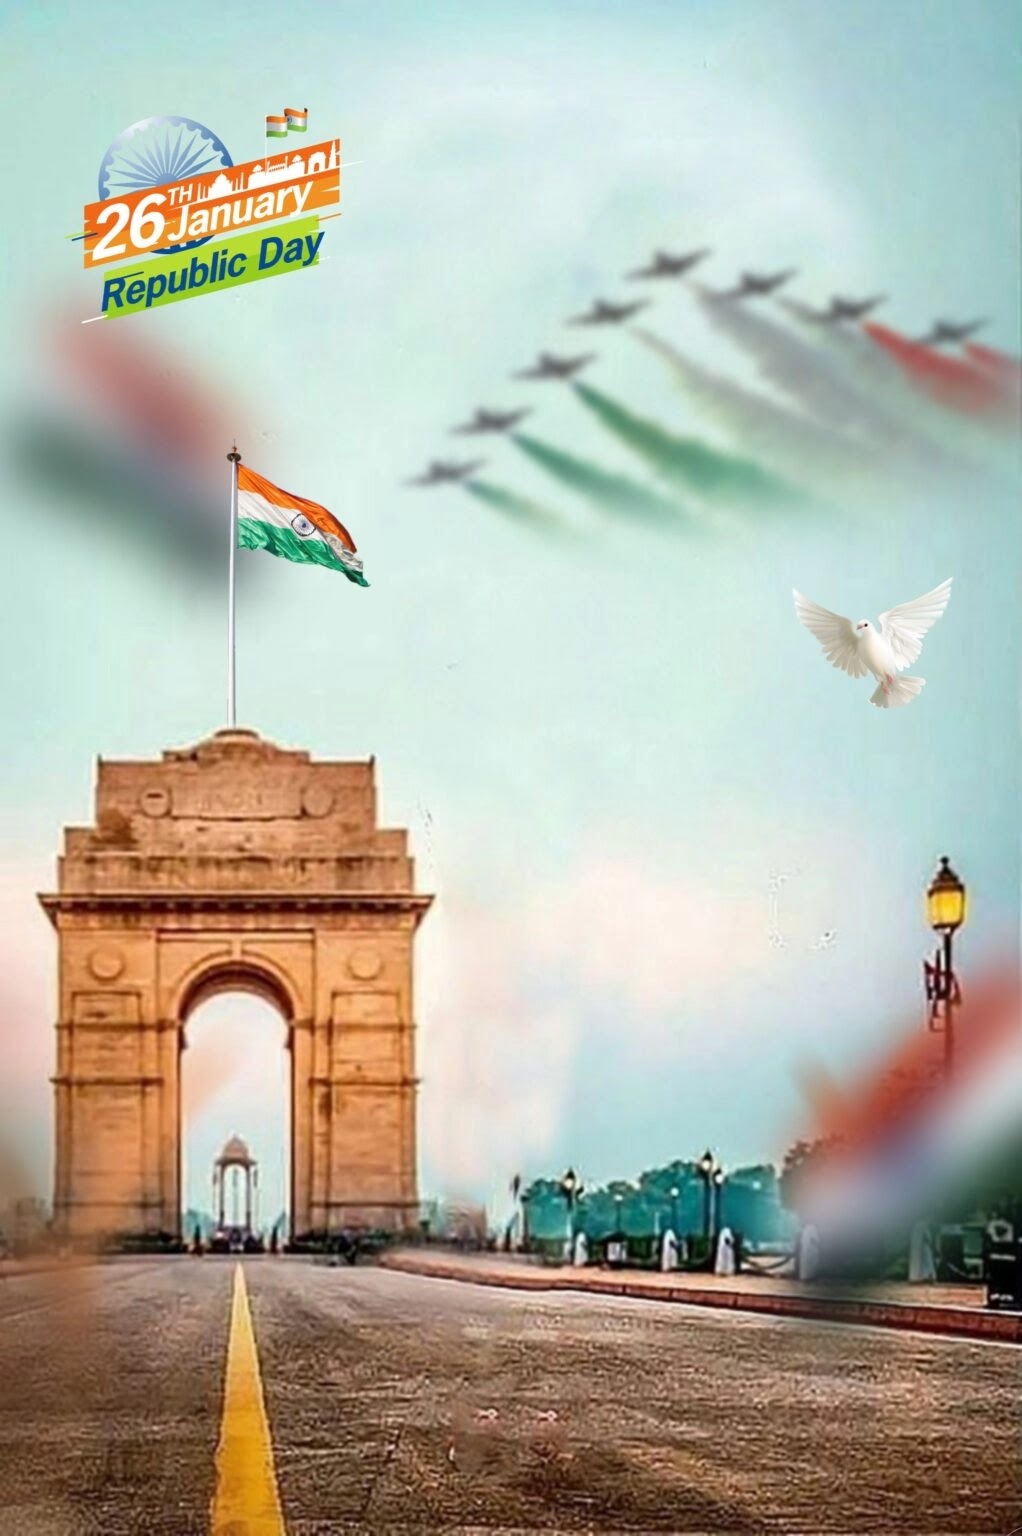 Today I brought Republic Day (26 January) special photo editing background images in HD quality. If you also want to do 26 January (Republic Day) special photo editing then you will need background. You have come to the right place to download 26 January special photo editing backgrounds.